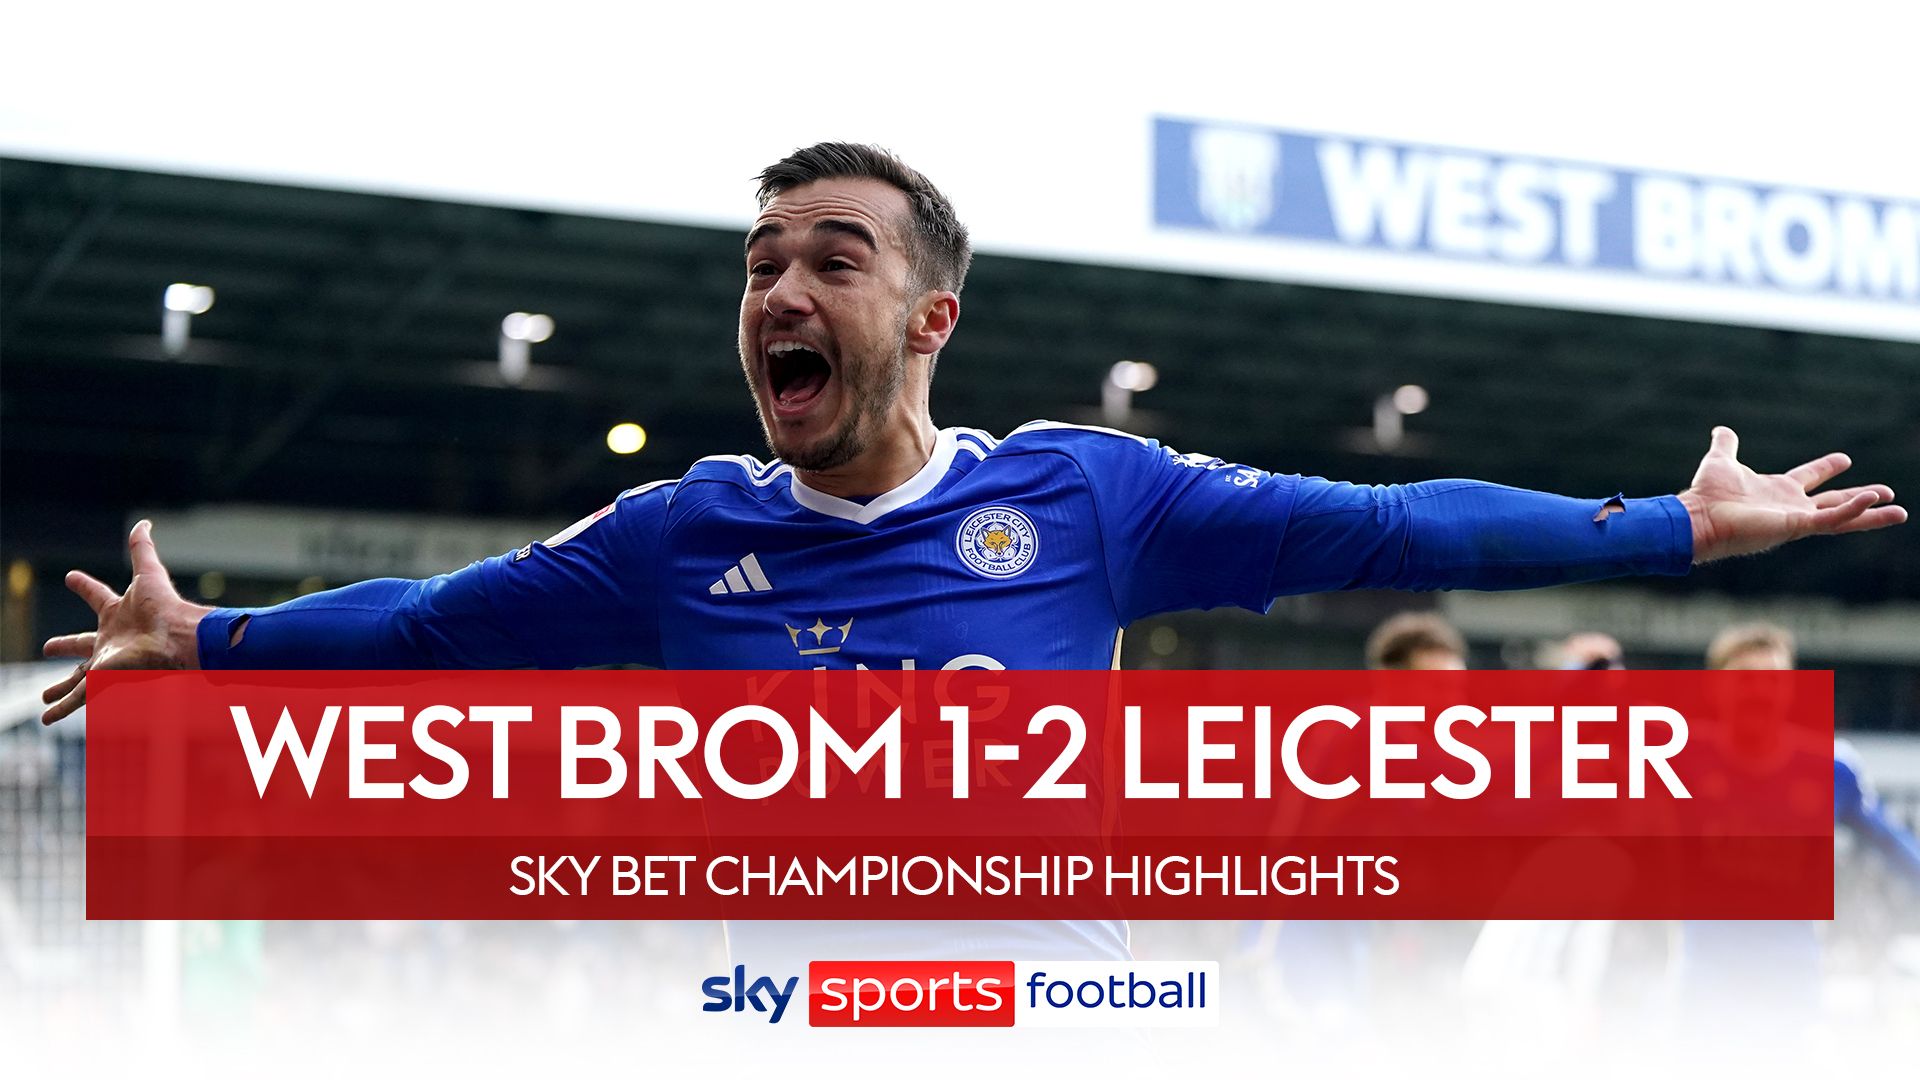 West Brom 1-2 Leicester